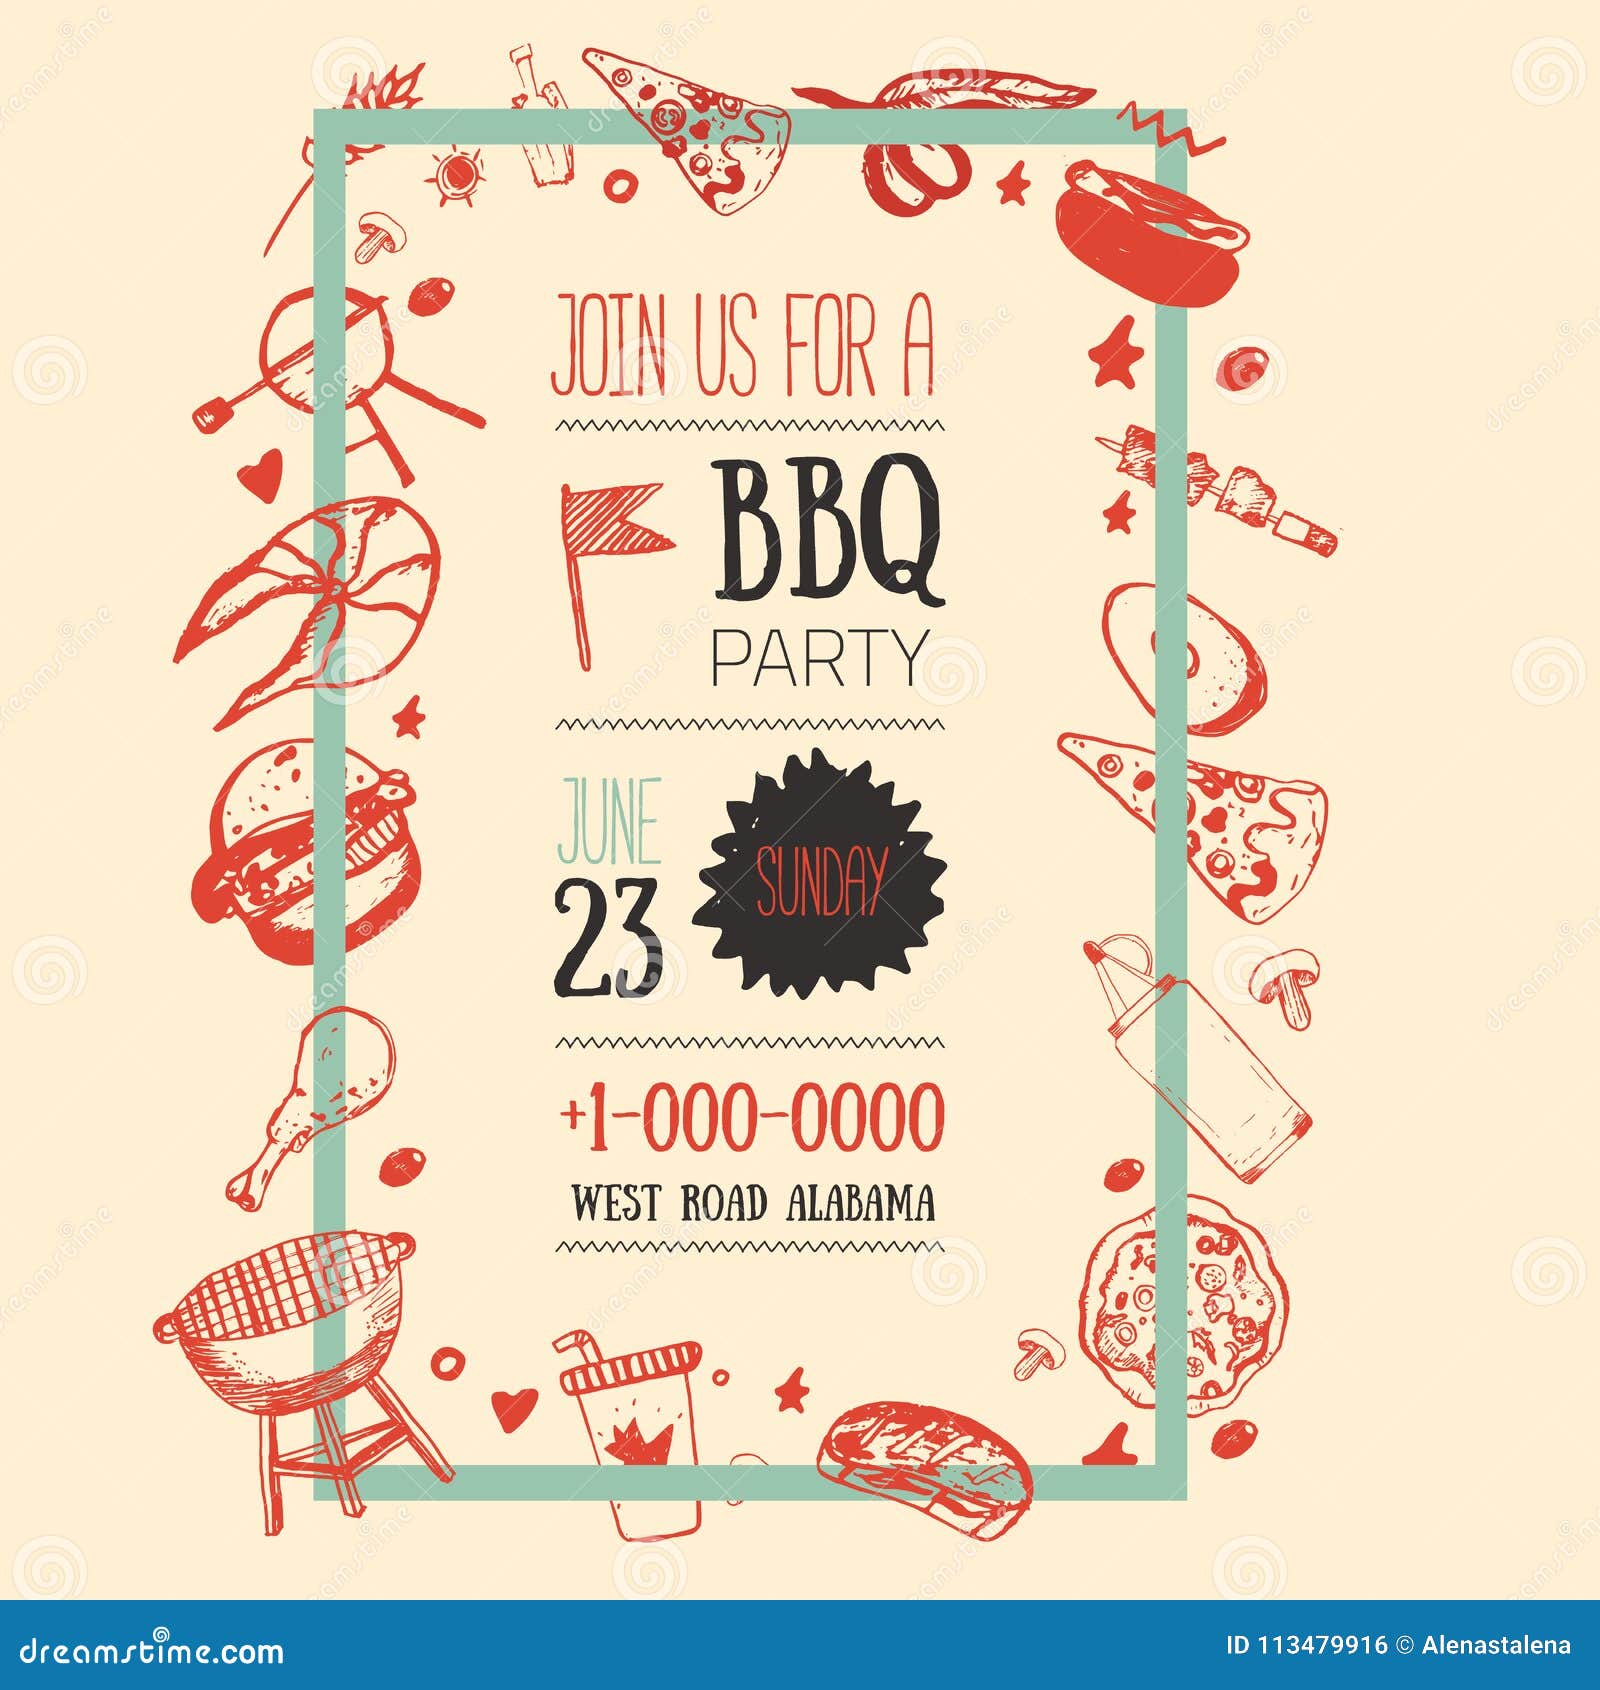 Barbeque Flyer Template from thumbs.dreamstime.com